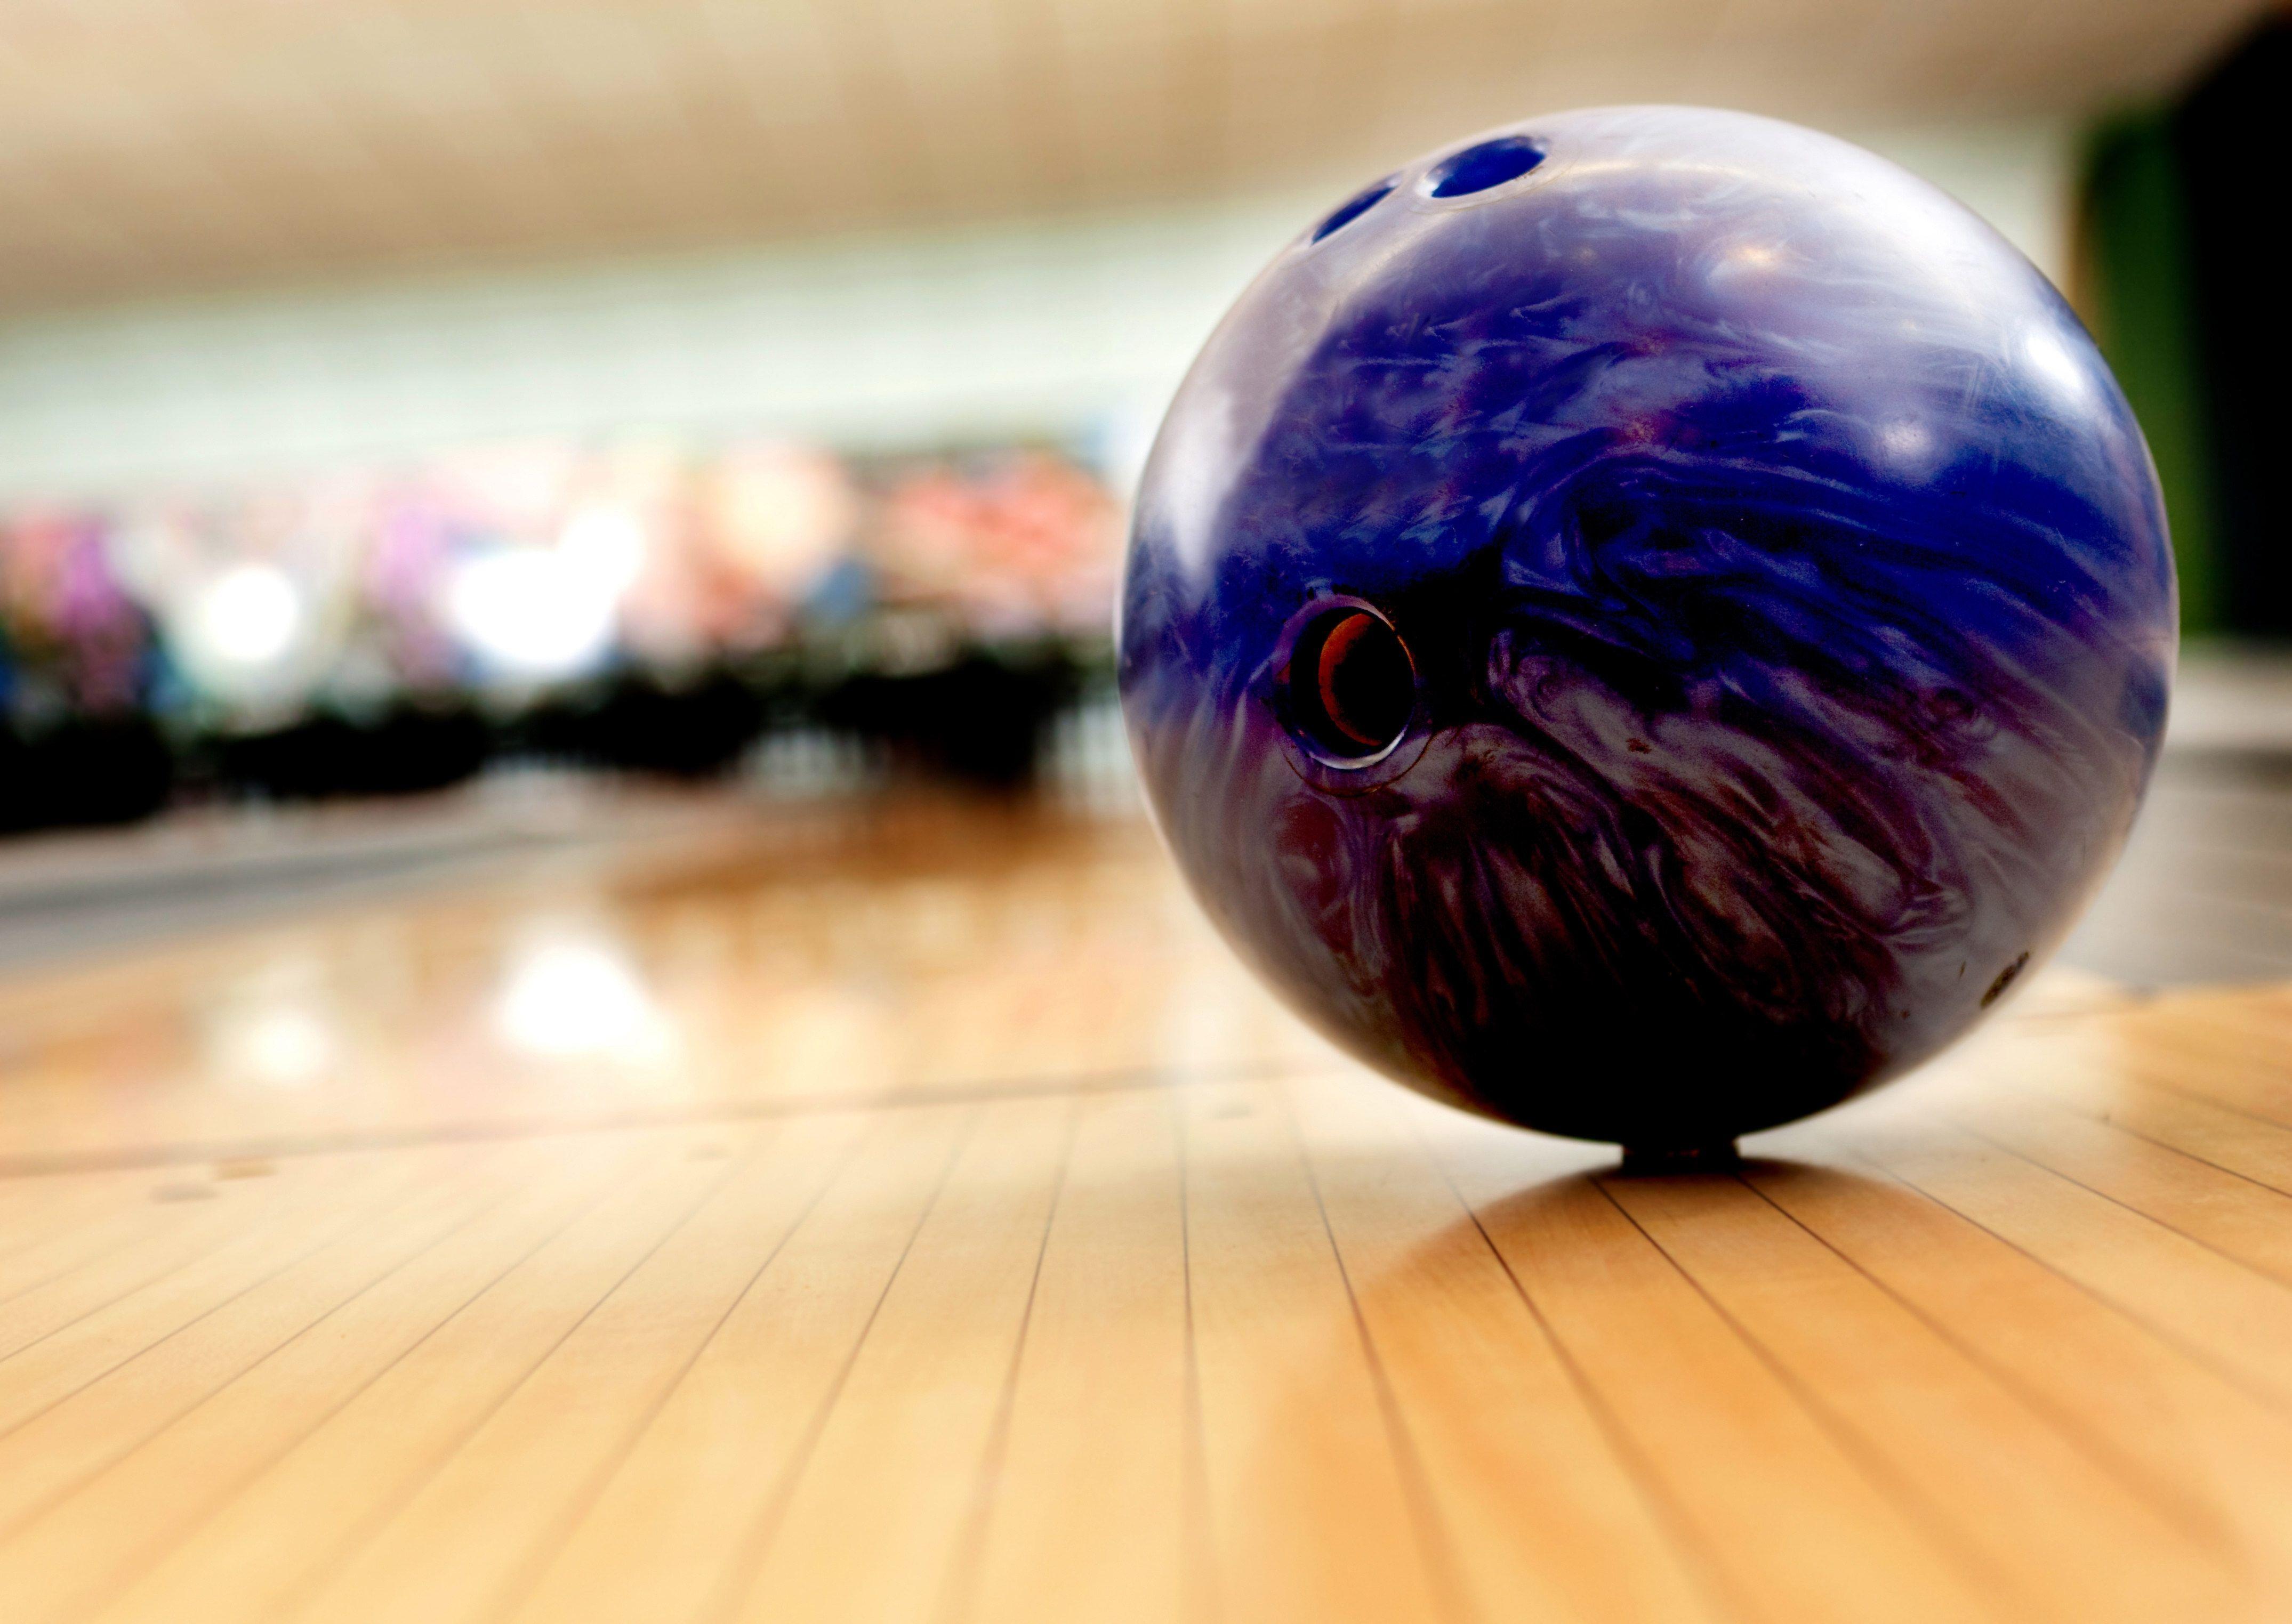 Download wallpaper 4299x3047 bowling, ball, blurred background HD